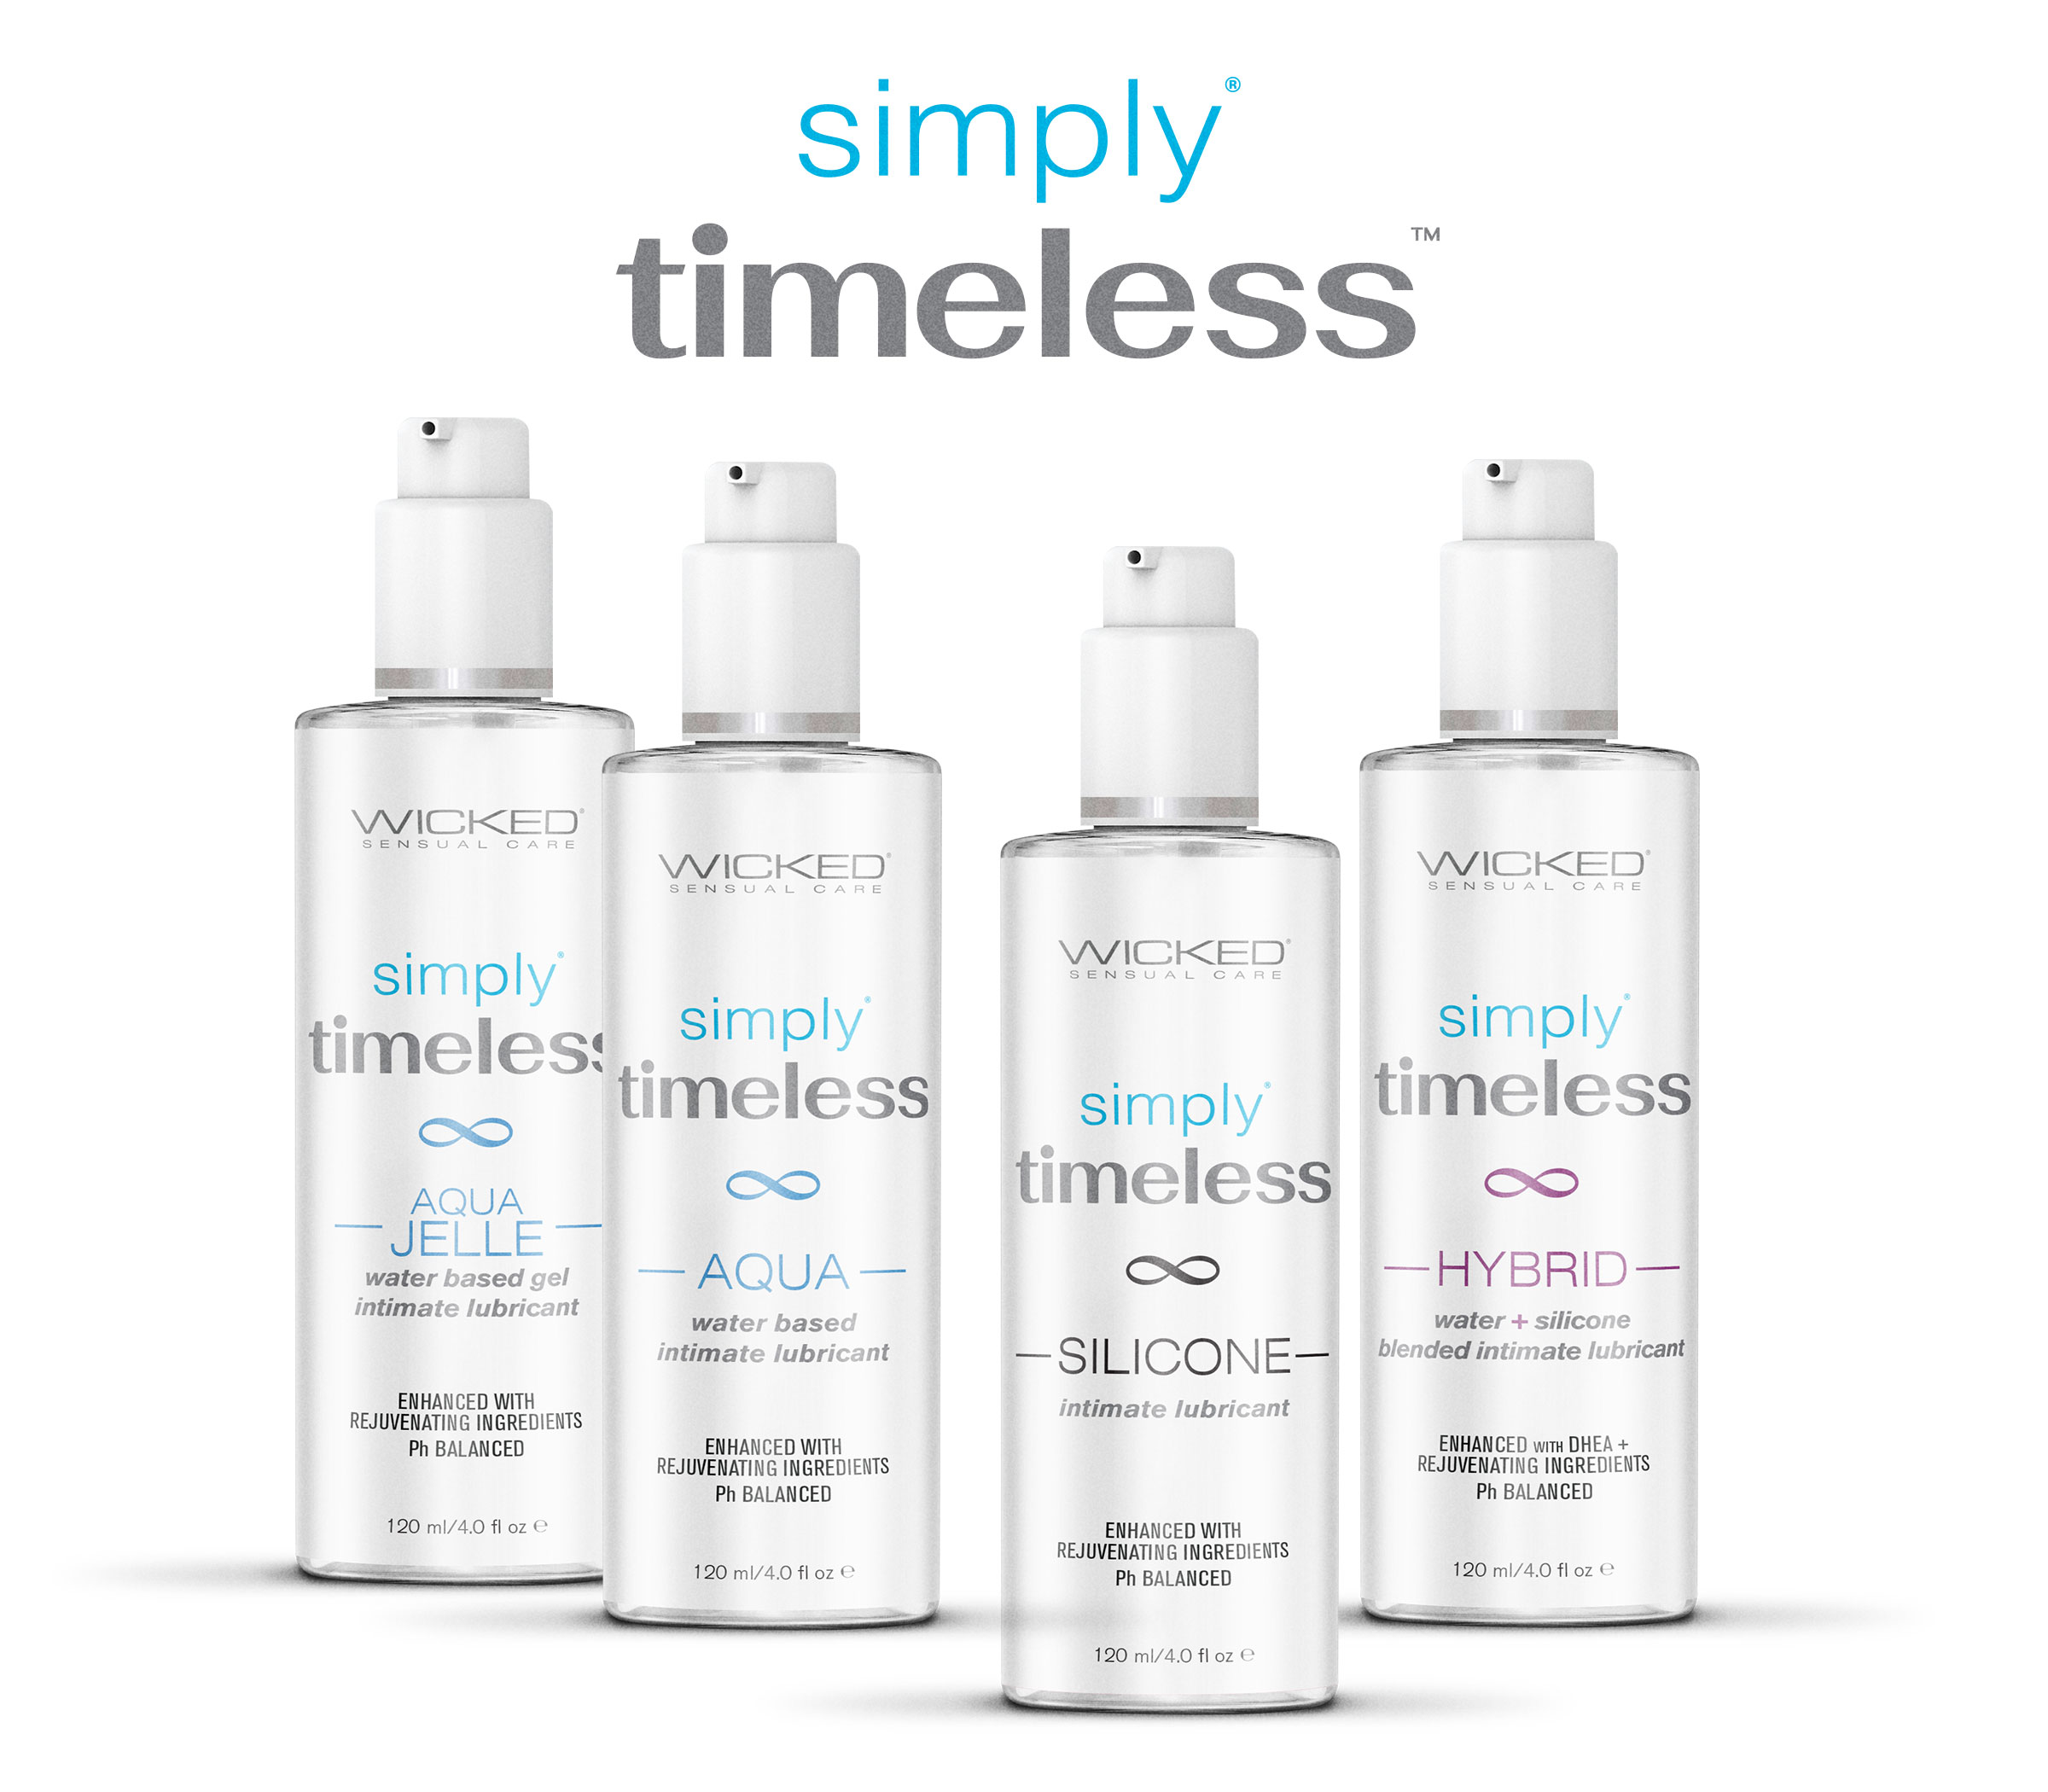 Wicked Sensual Care Announces Joan Price as First simply® timeless Ambassador